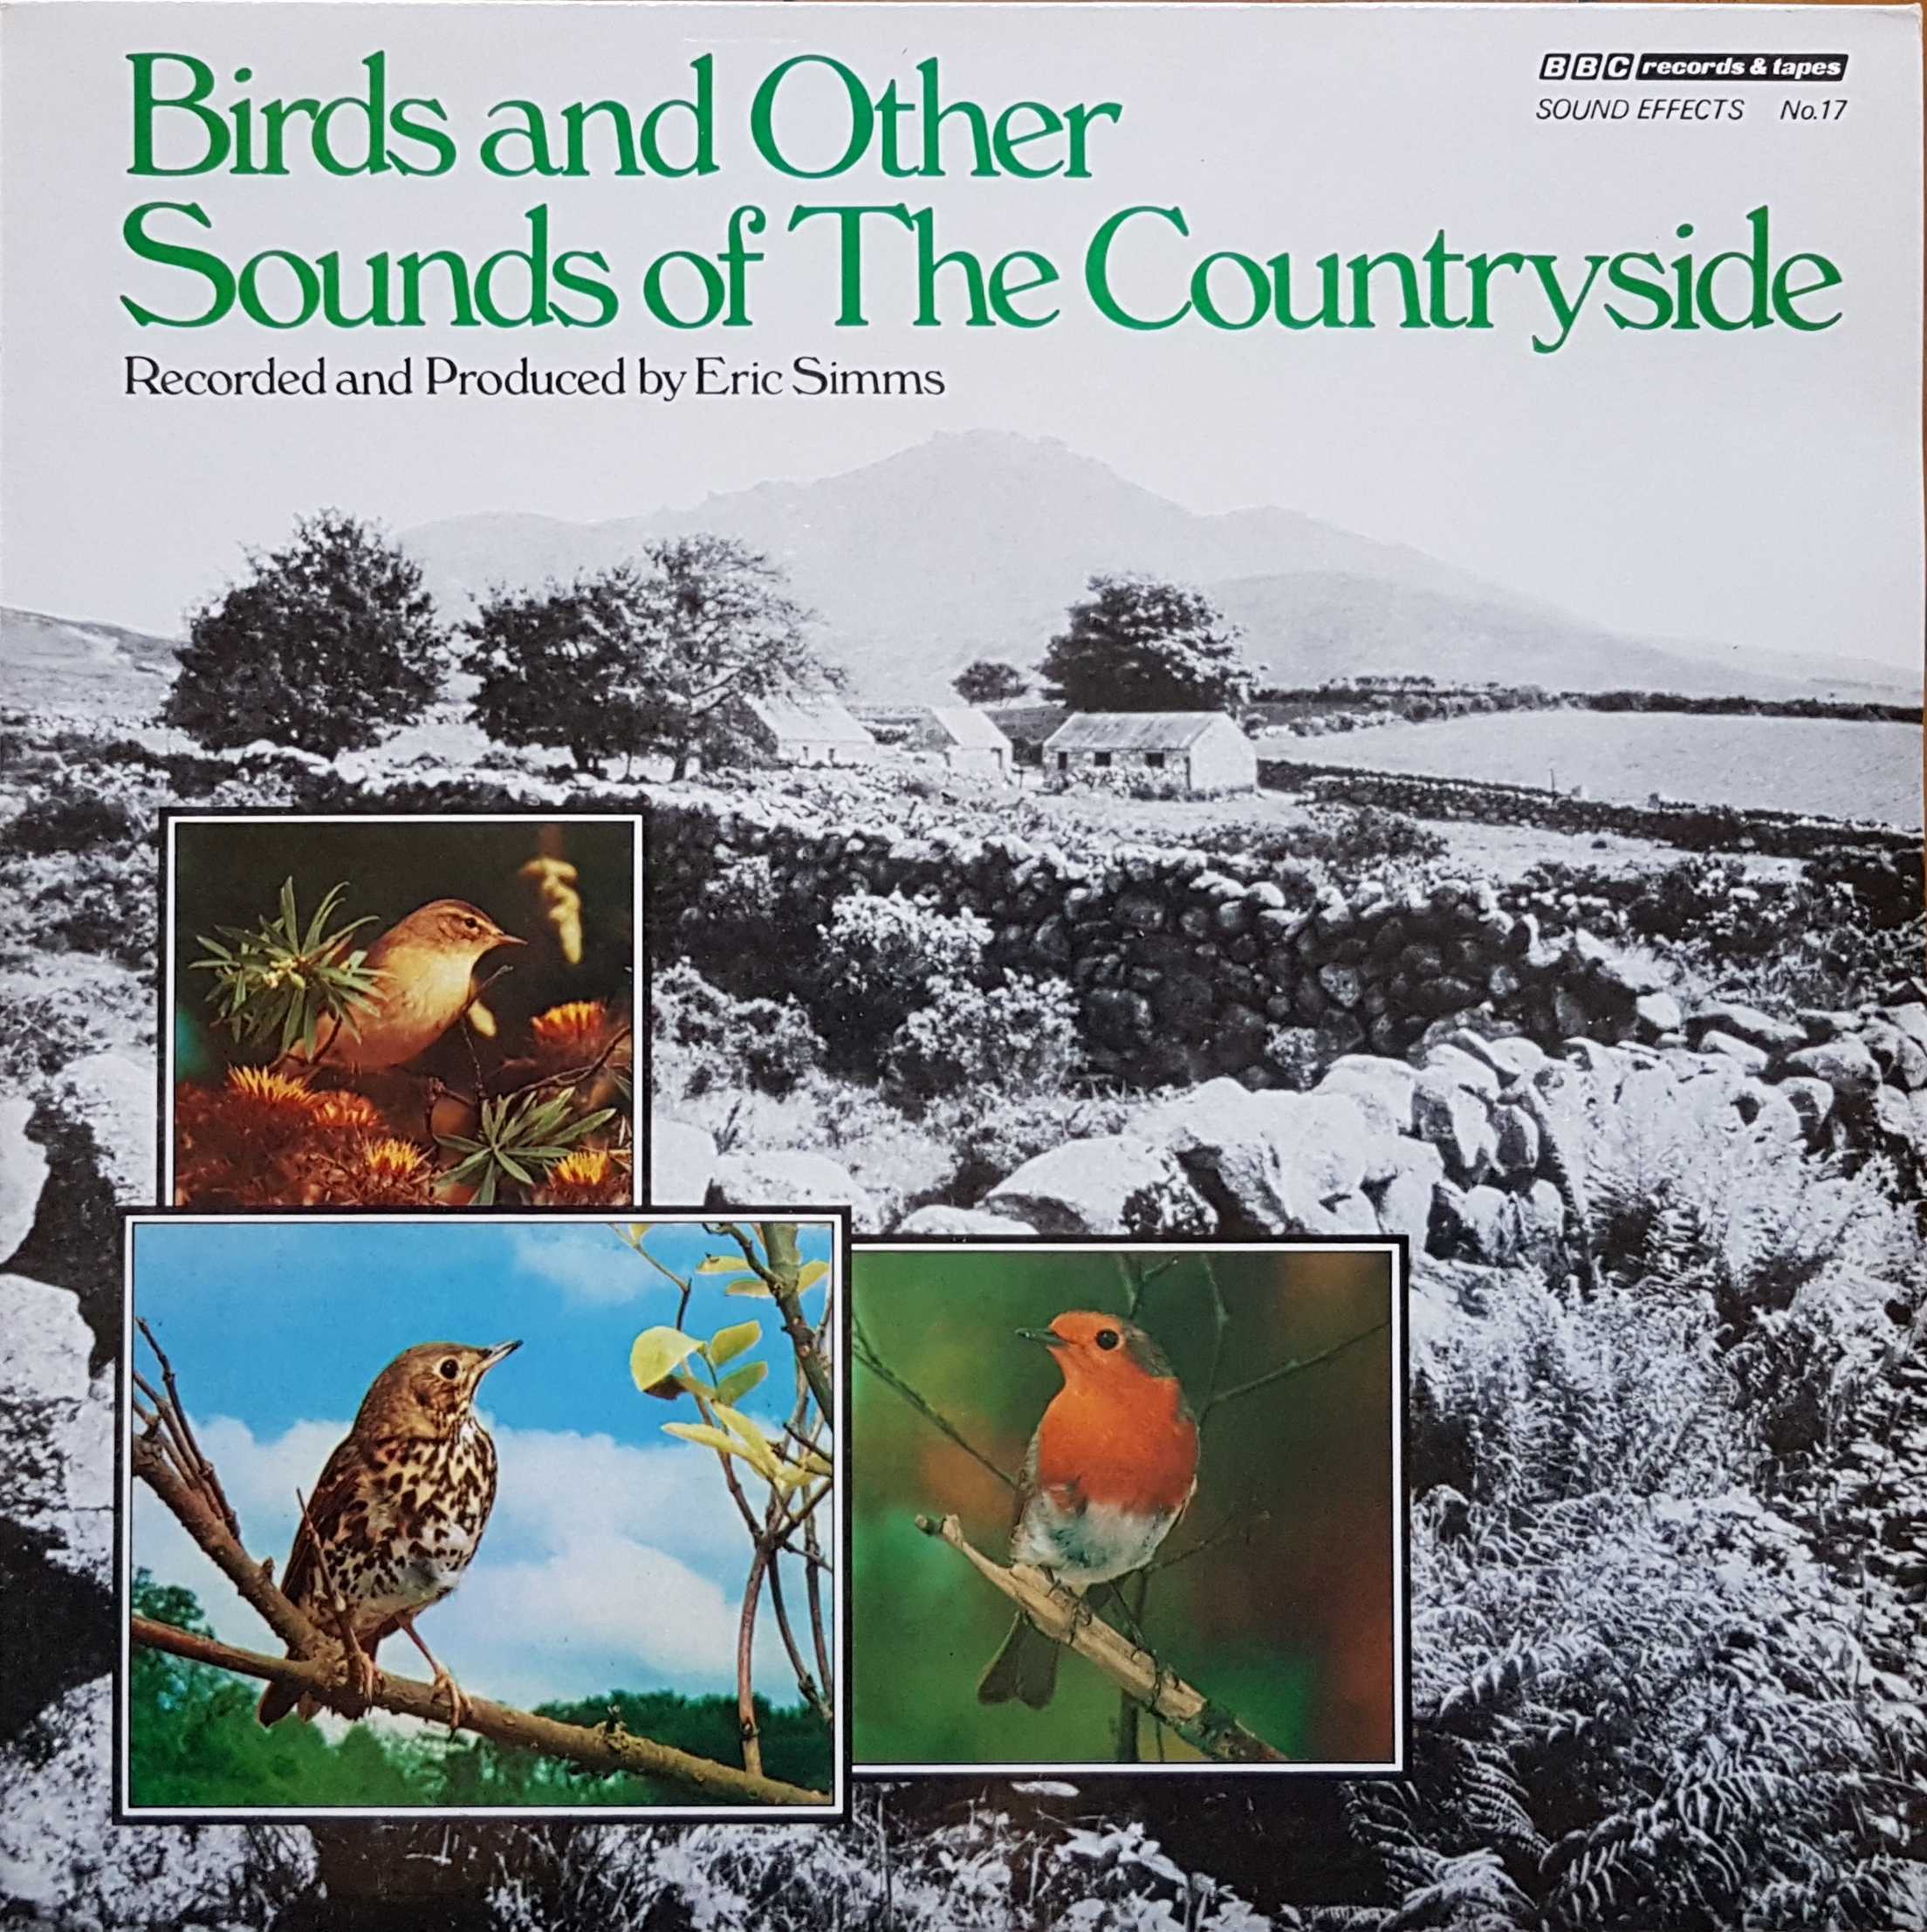 Picture of REC 299 Birds and other sounds of the countryside (Sound effects no. 17) by artist Various from the BBC albums - Records and Tapes library